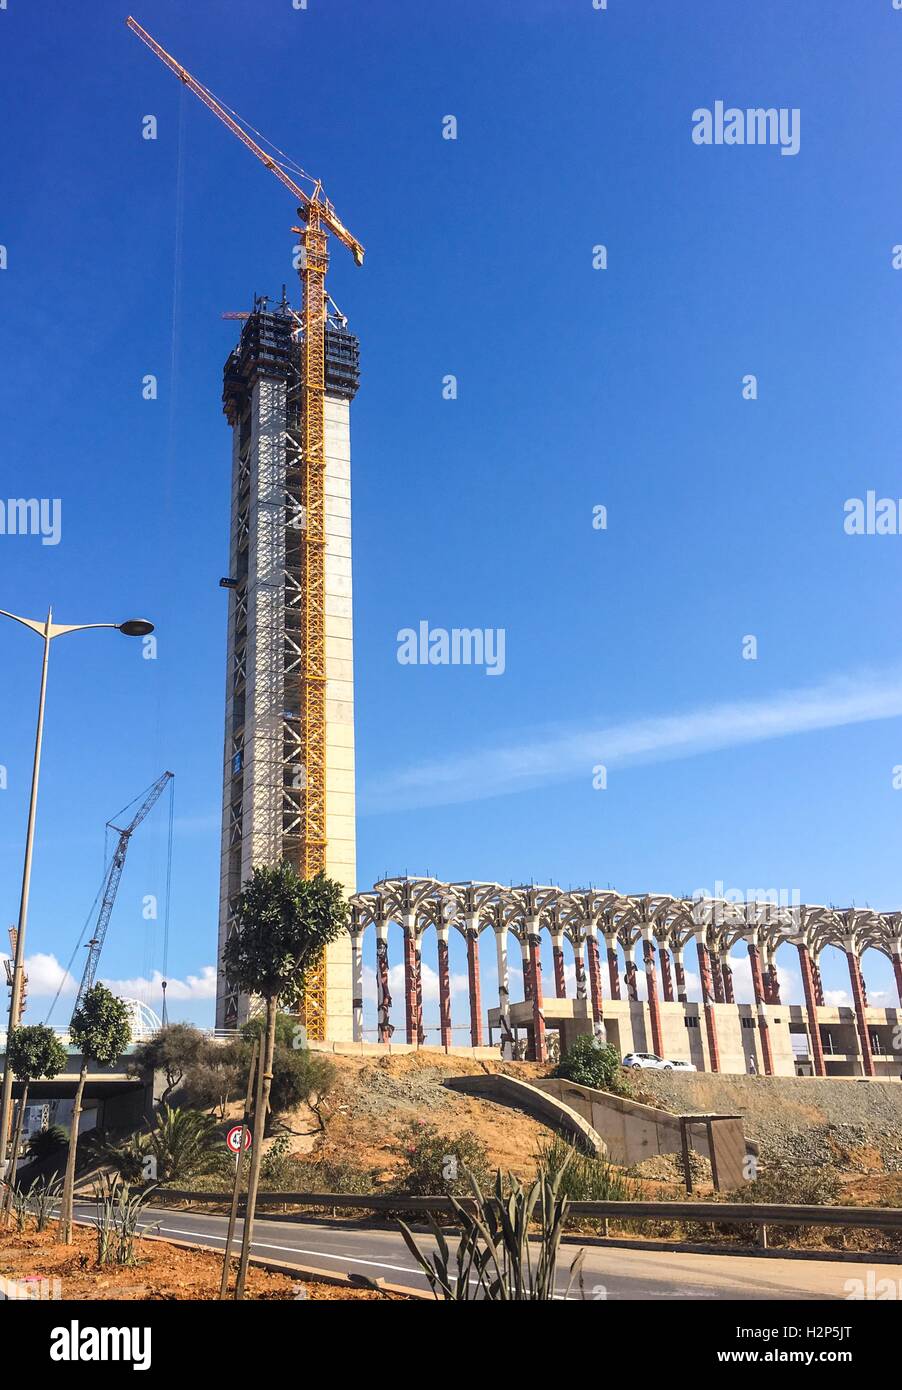 World's biggest mosque is being built in Algiers Algeria.Mosque will have tallest minaret. Stock Photo